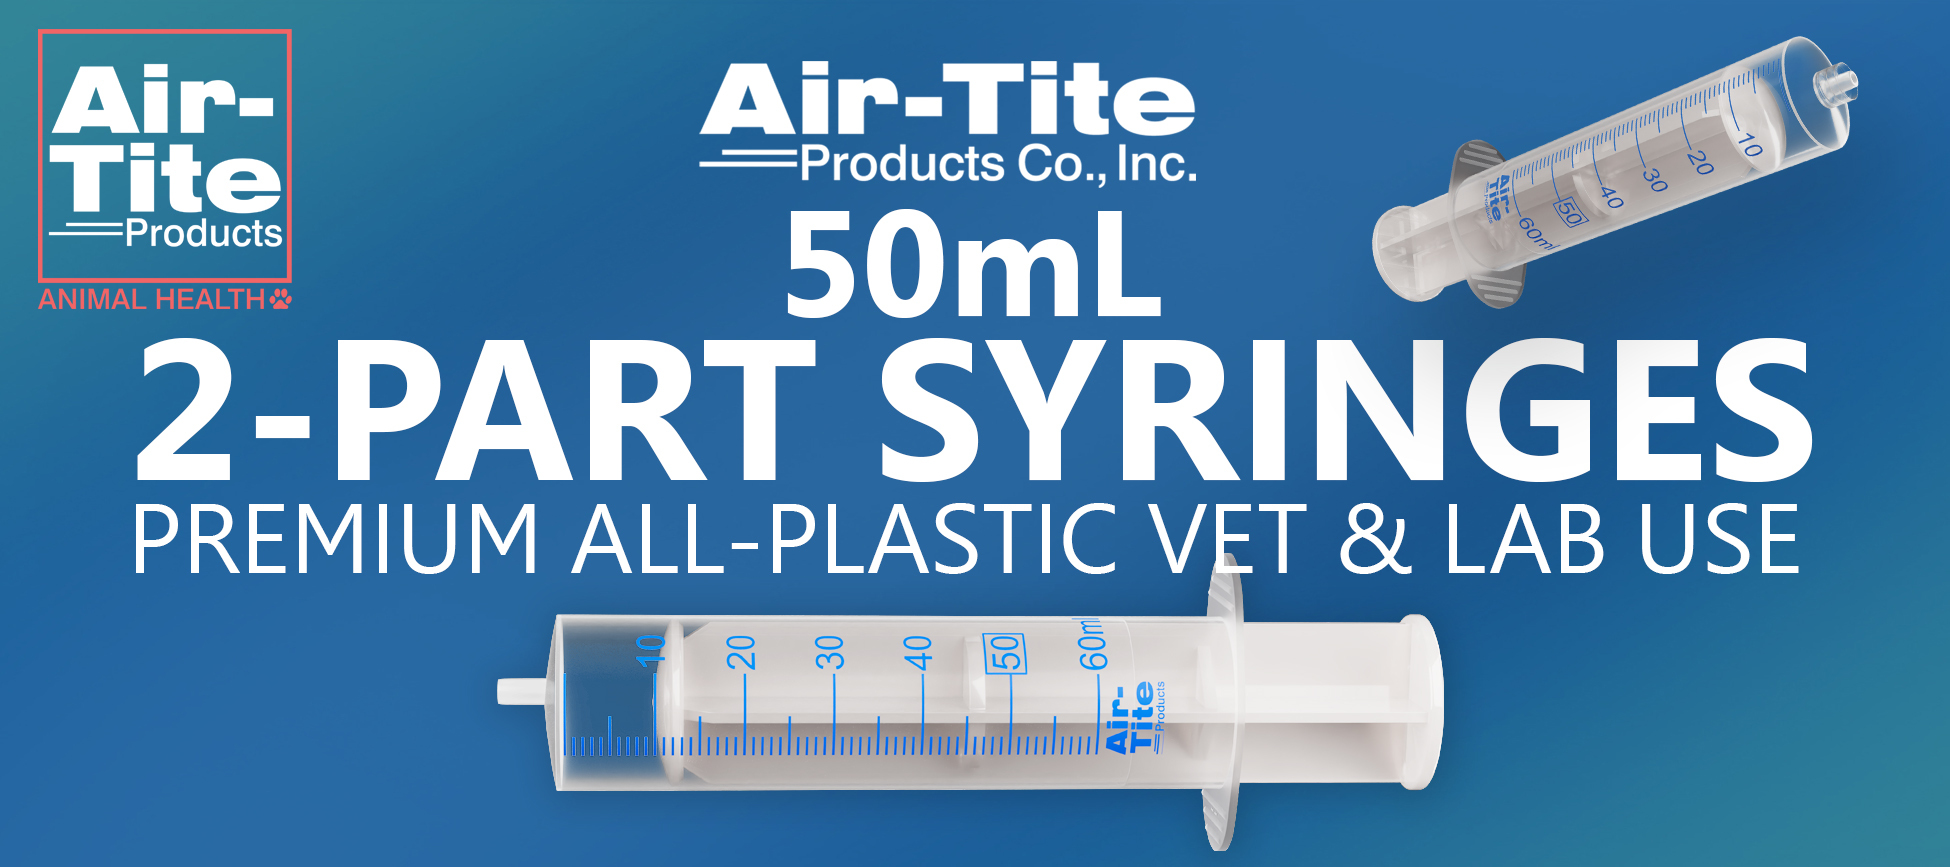 Air-Tite Animal Health Introduces the New 50ml 2-Part Syringe for Veterinary & Laboratory Applications